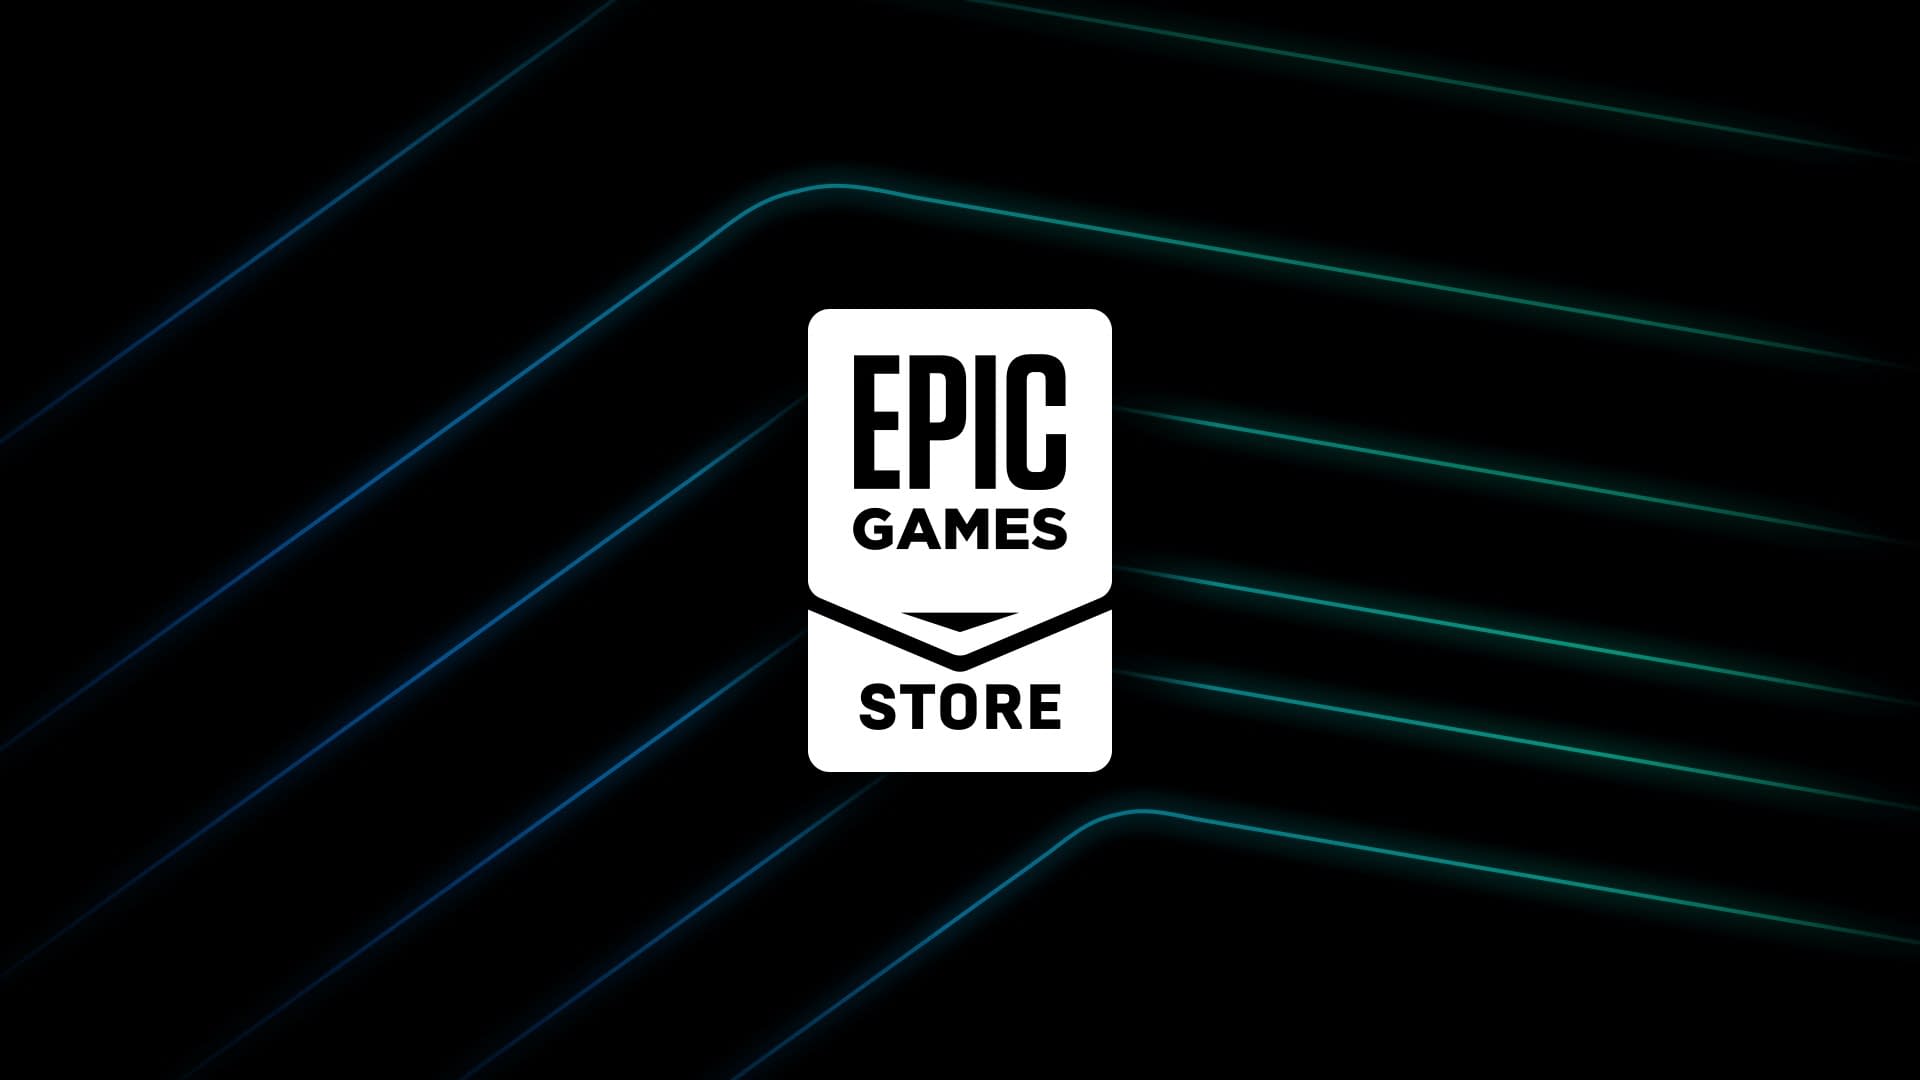 Epic Games This Week Which Game Is Free? How Much?